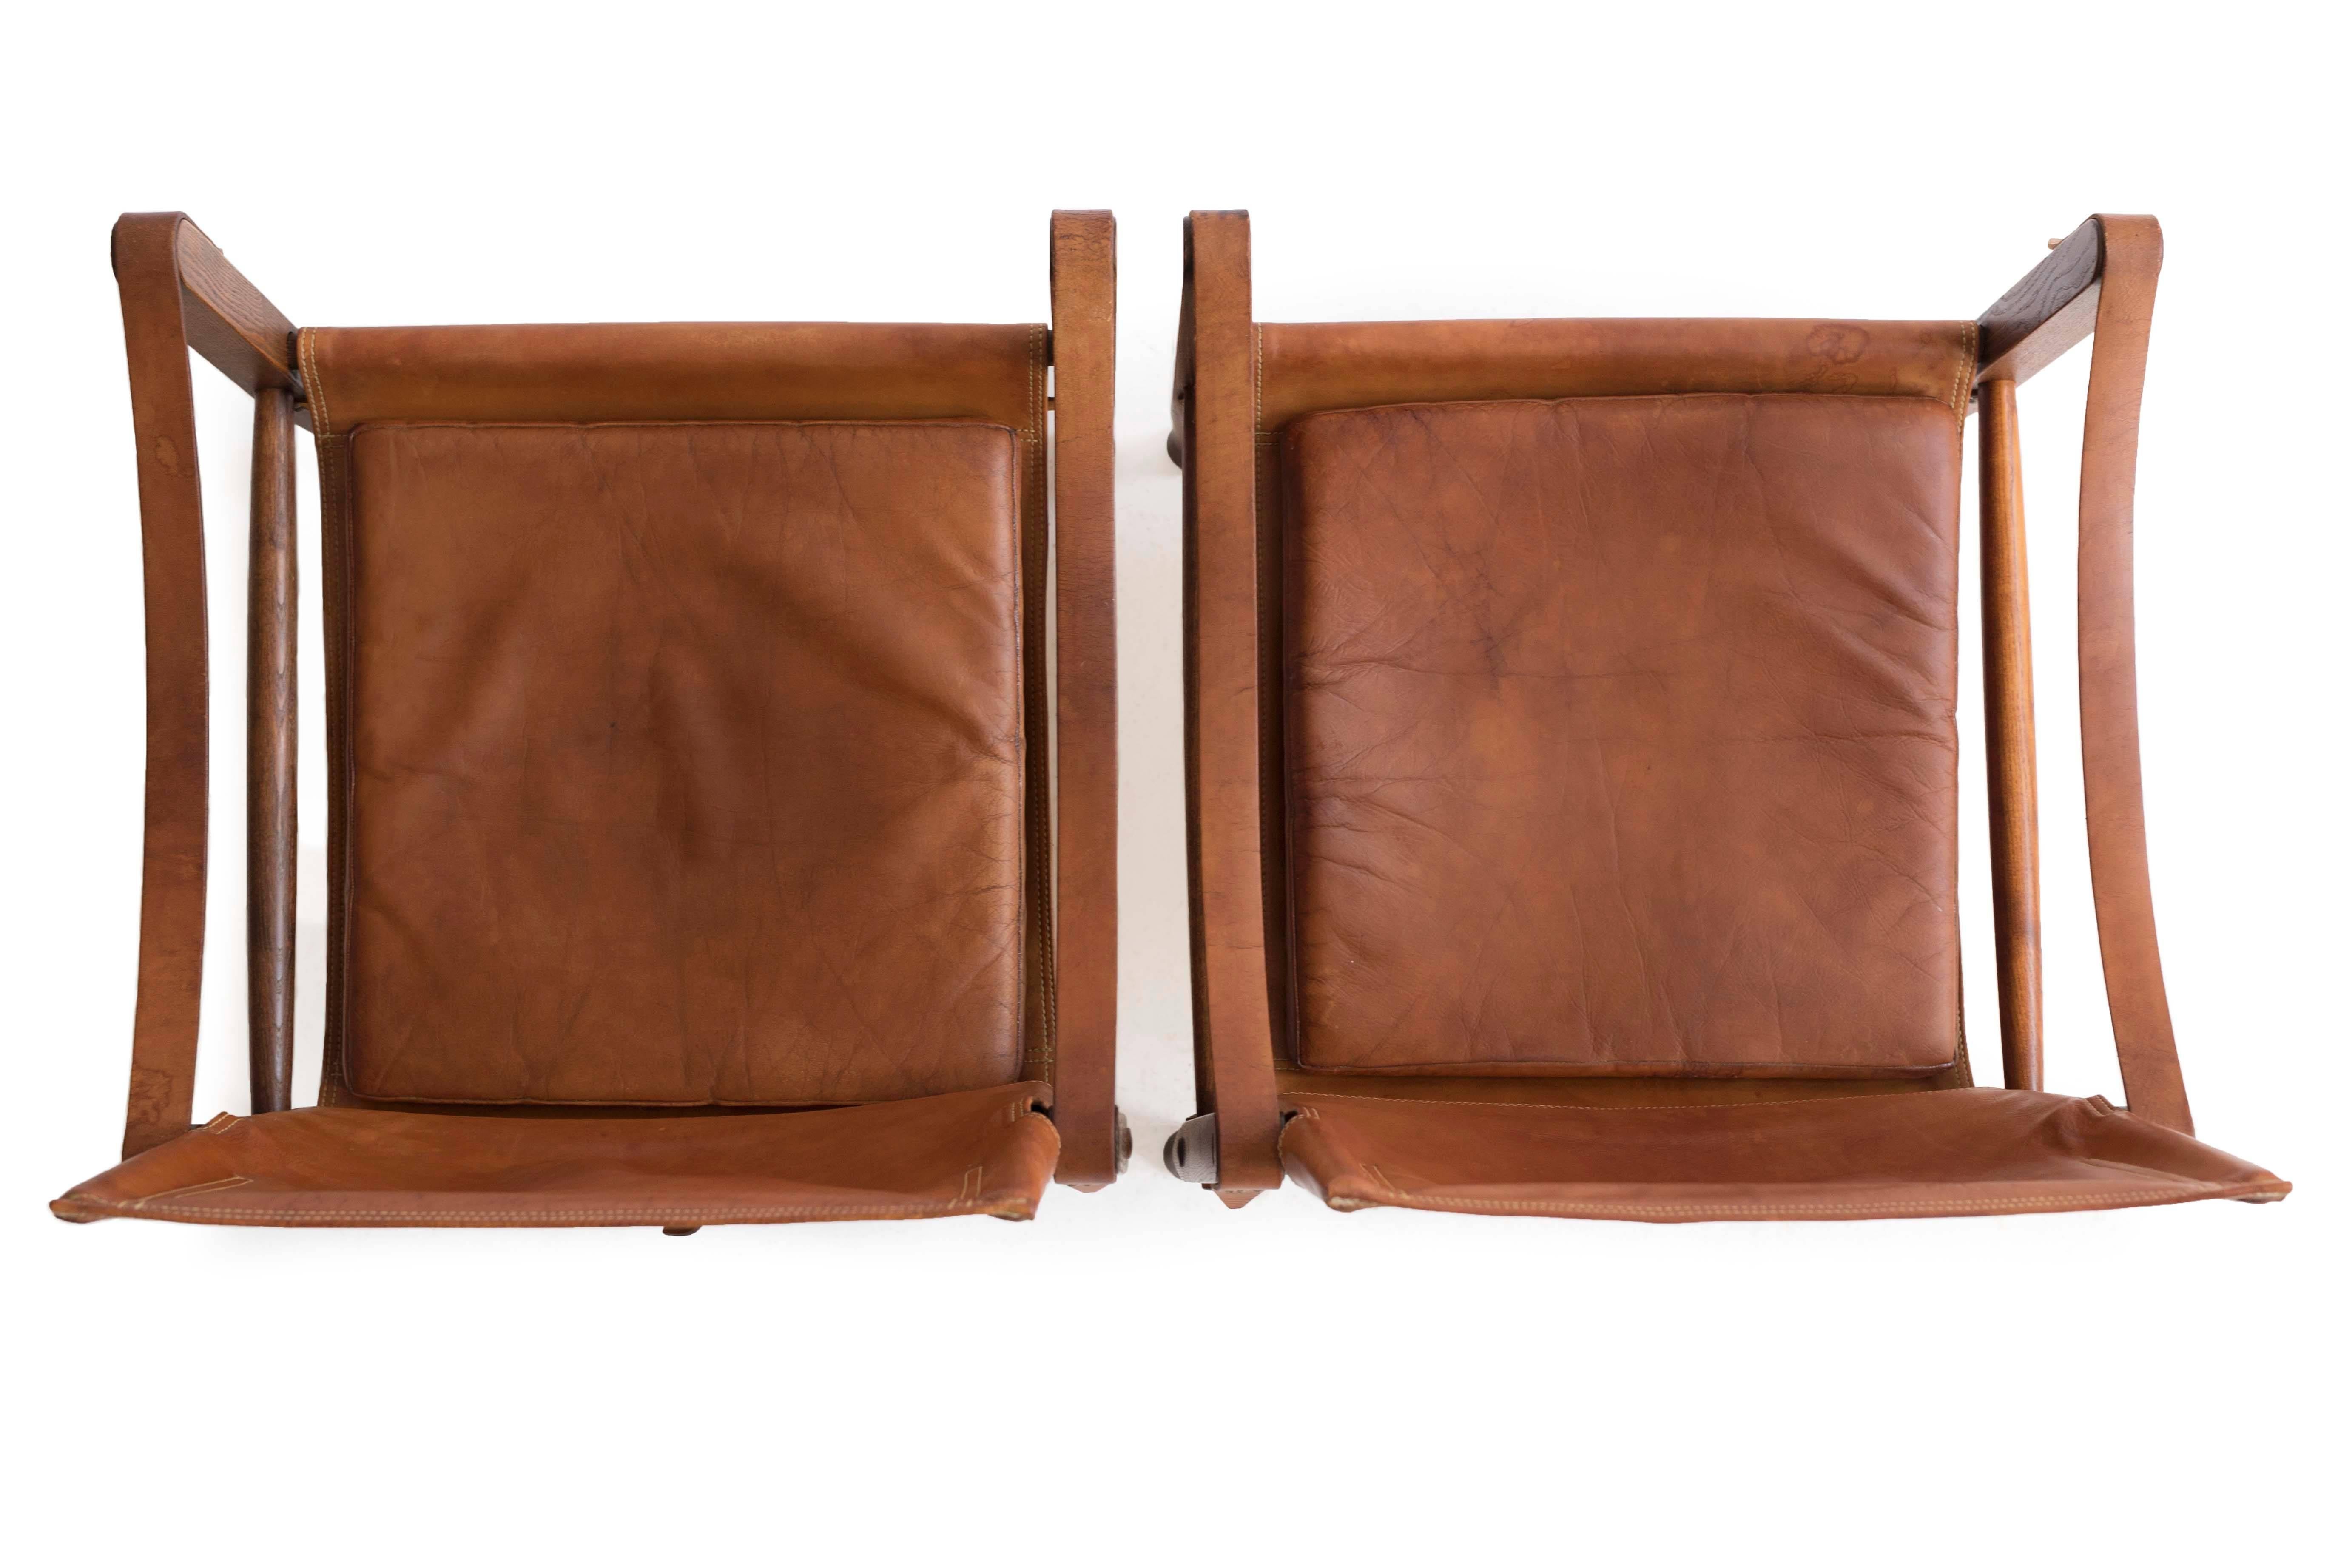 A pair of Kaare Klint 'Safari chairs.' 

Frames of stained ash, upholstered with original patinated leather. 

Designed by Kaare Klint, 1933, manufactured by Rud. Rasmussen, Copenhagen, Denmark. 

Original condition with some natural wear.